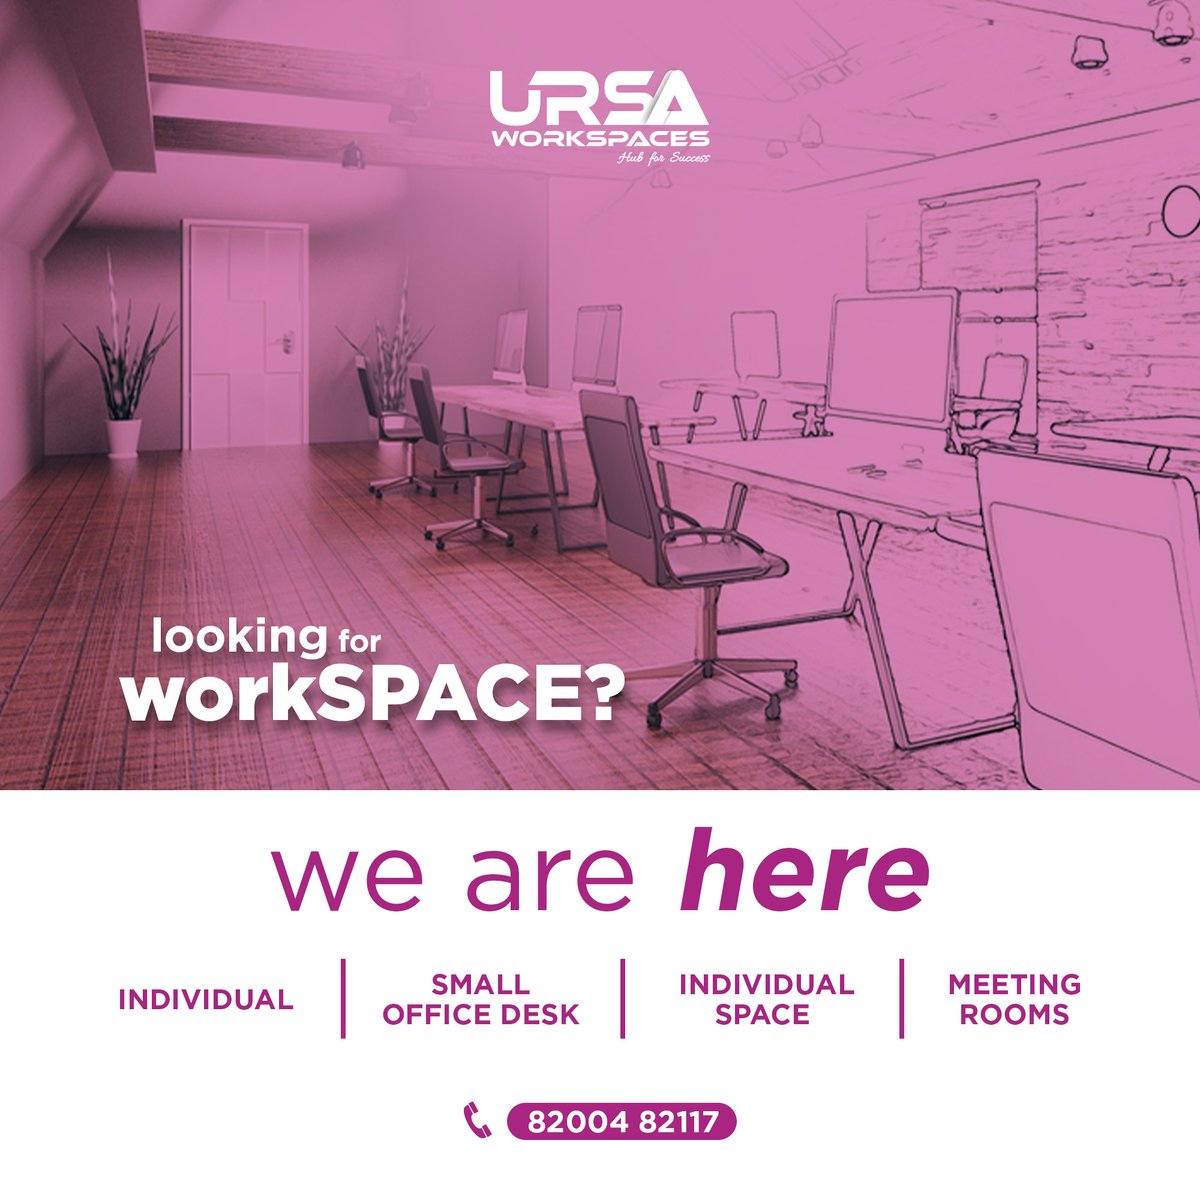 Discover the perfect workspace at URSA Workspaces! 🏢✨ Whether you're a freelancer, entrepreneur, or a growing team, we've got you covered. Step into productivity and comfort with us!

#URSAWorkspaces #WorkspaceSolutions #OfficeSpaceForRent #WorkplaceCommunity